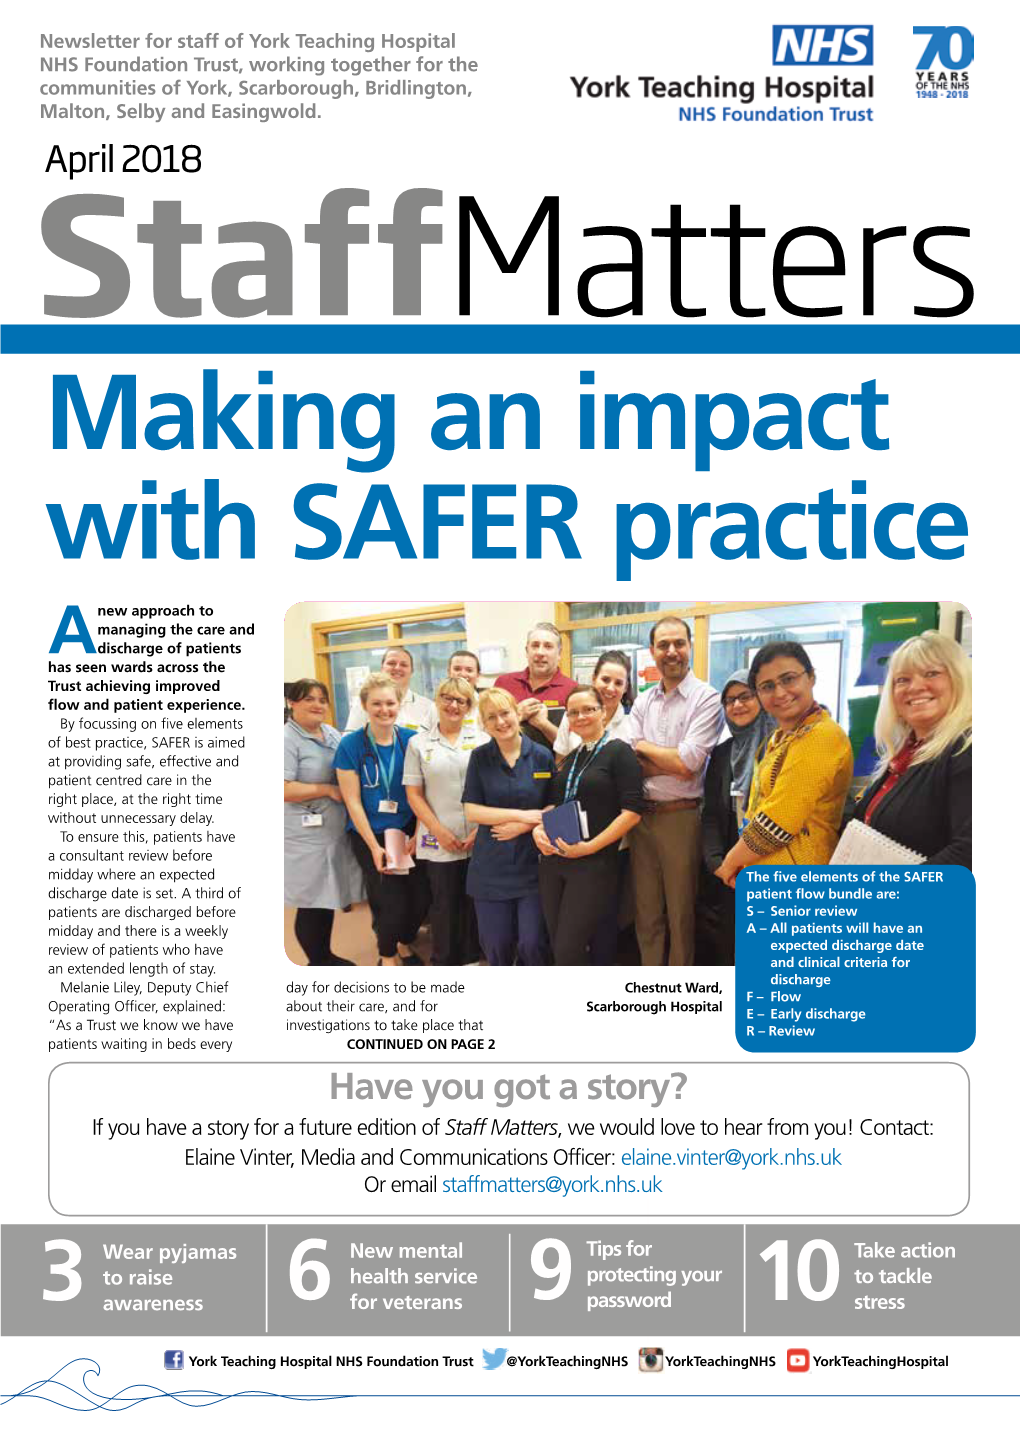 Making an Impact with SAFER Practice